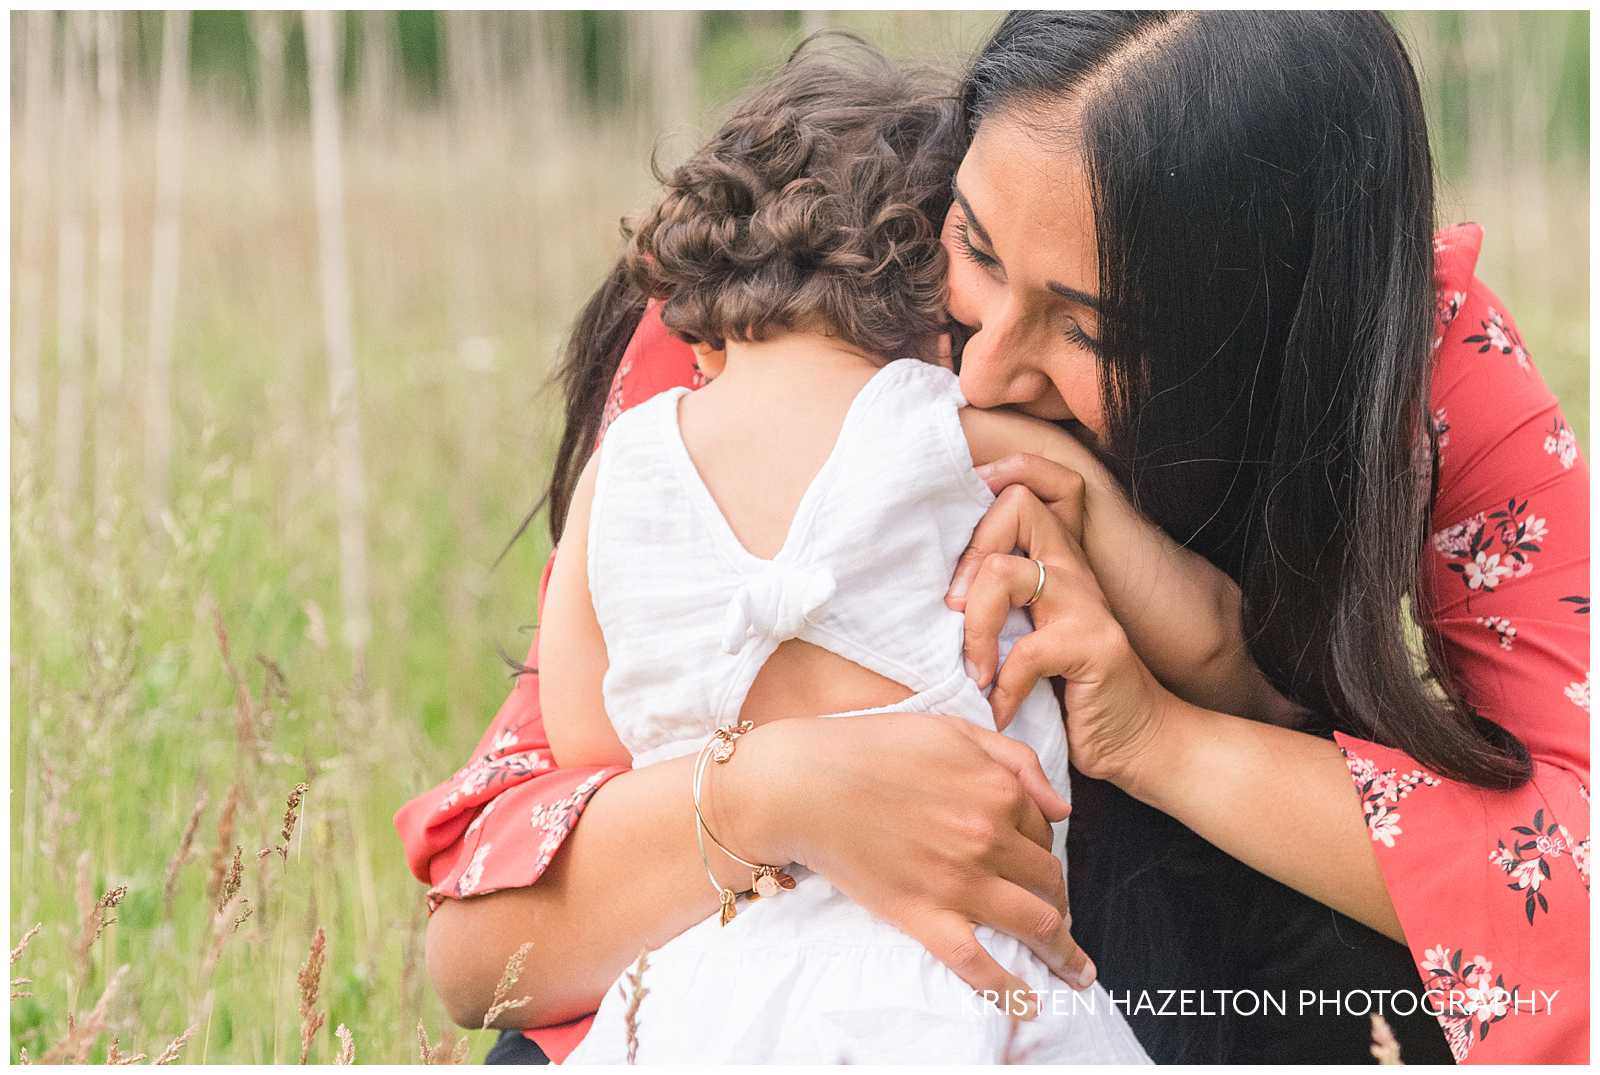 Photo of a toddler girl snuggling with her mother by Forest Park, IL photographer Kristen Hazelton